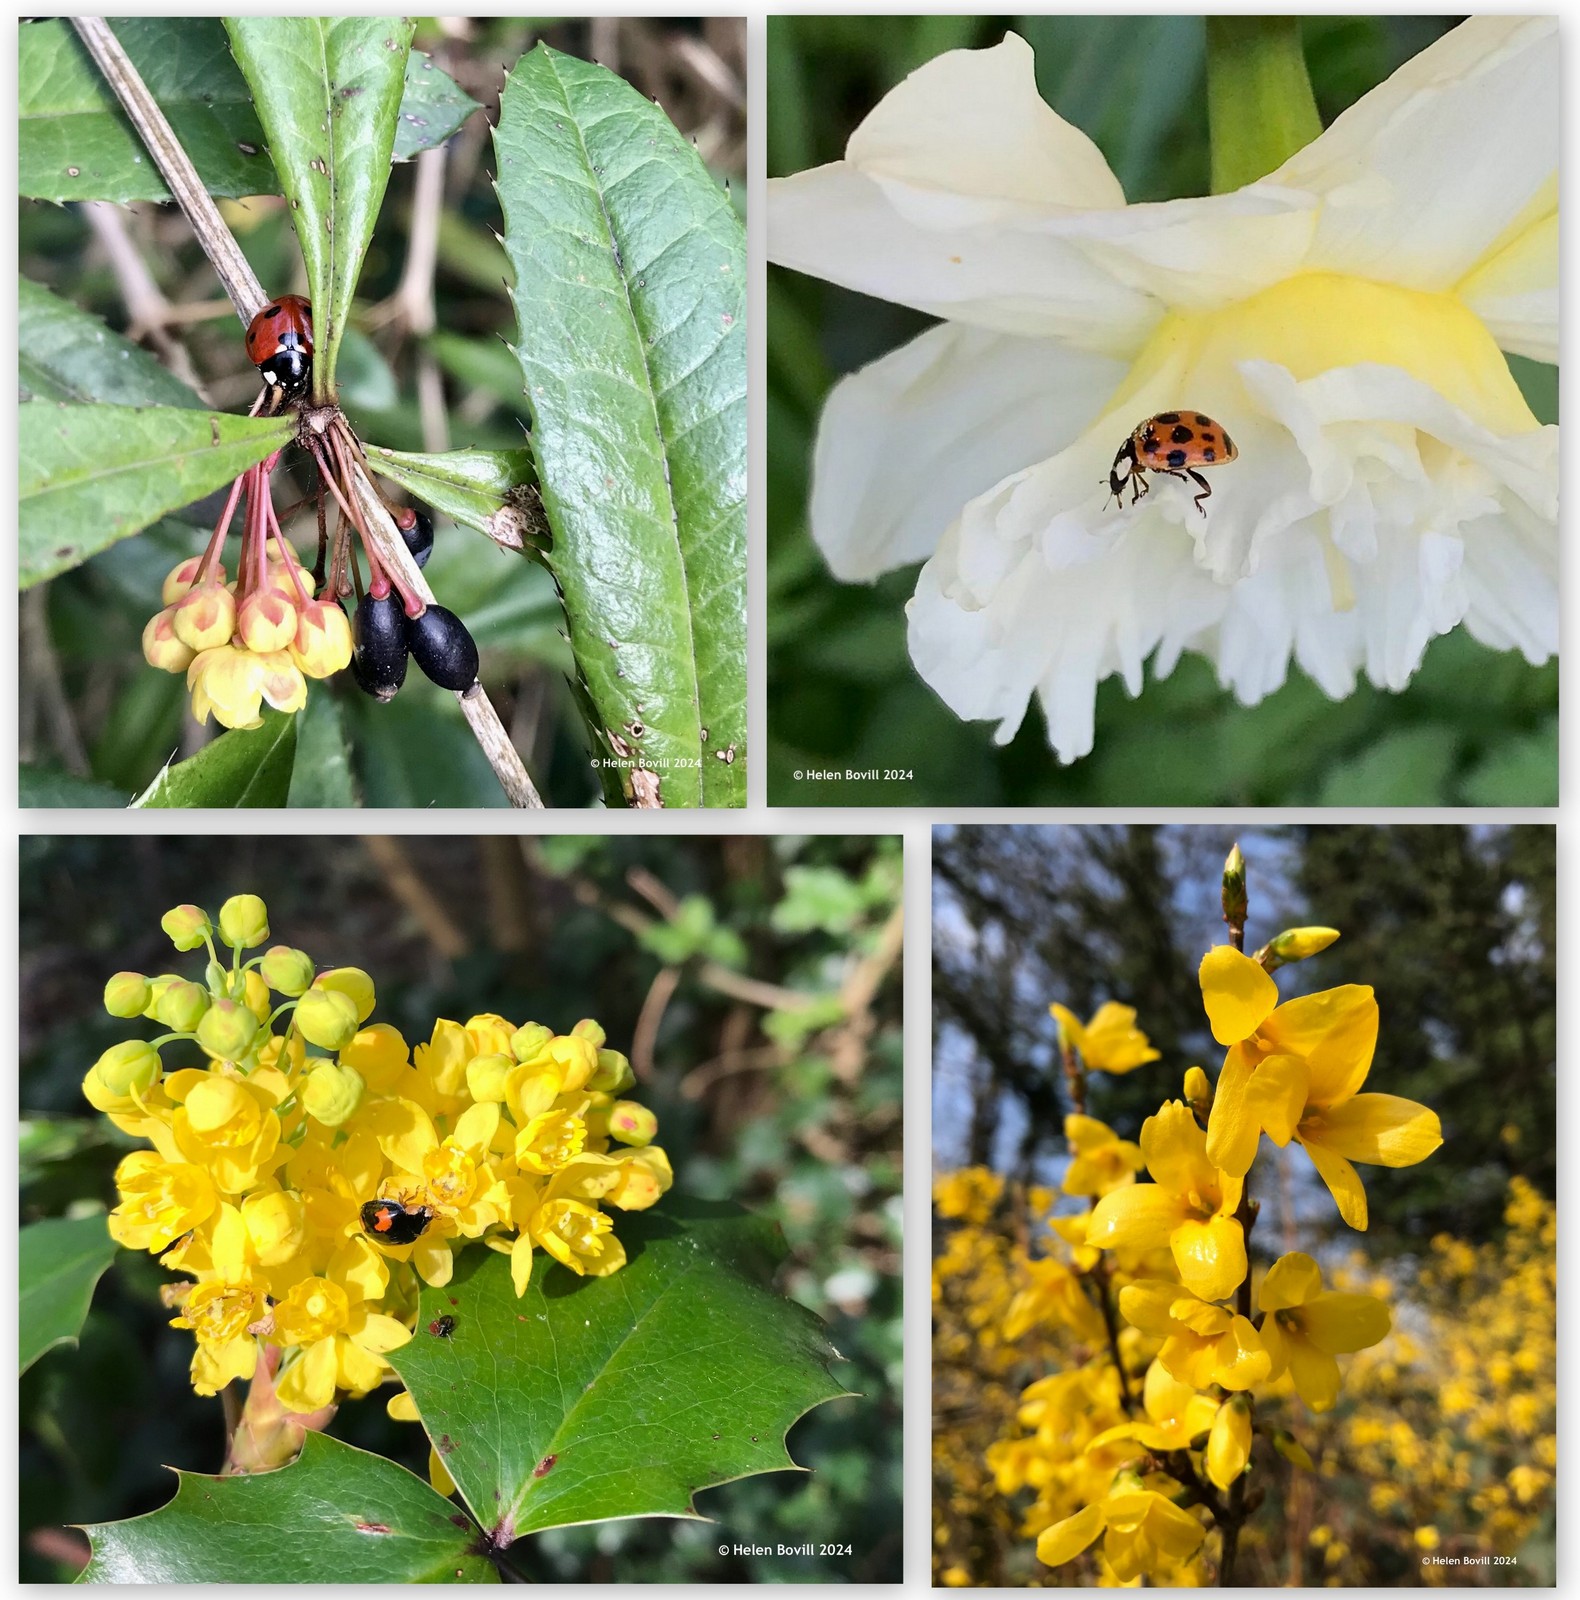 Four photos showing yellow flowers as food for the cemetery wildlife - berberis, daffodil,mahonia and forsythia.